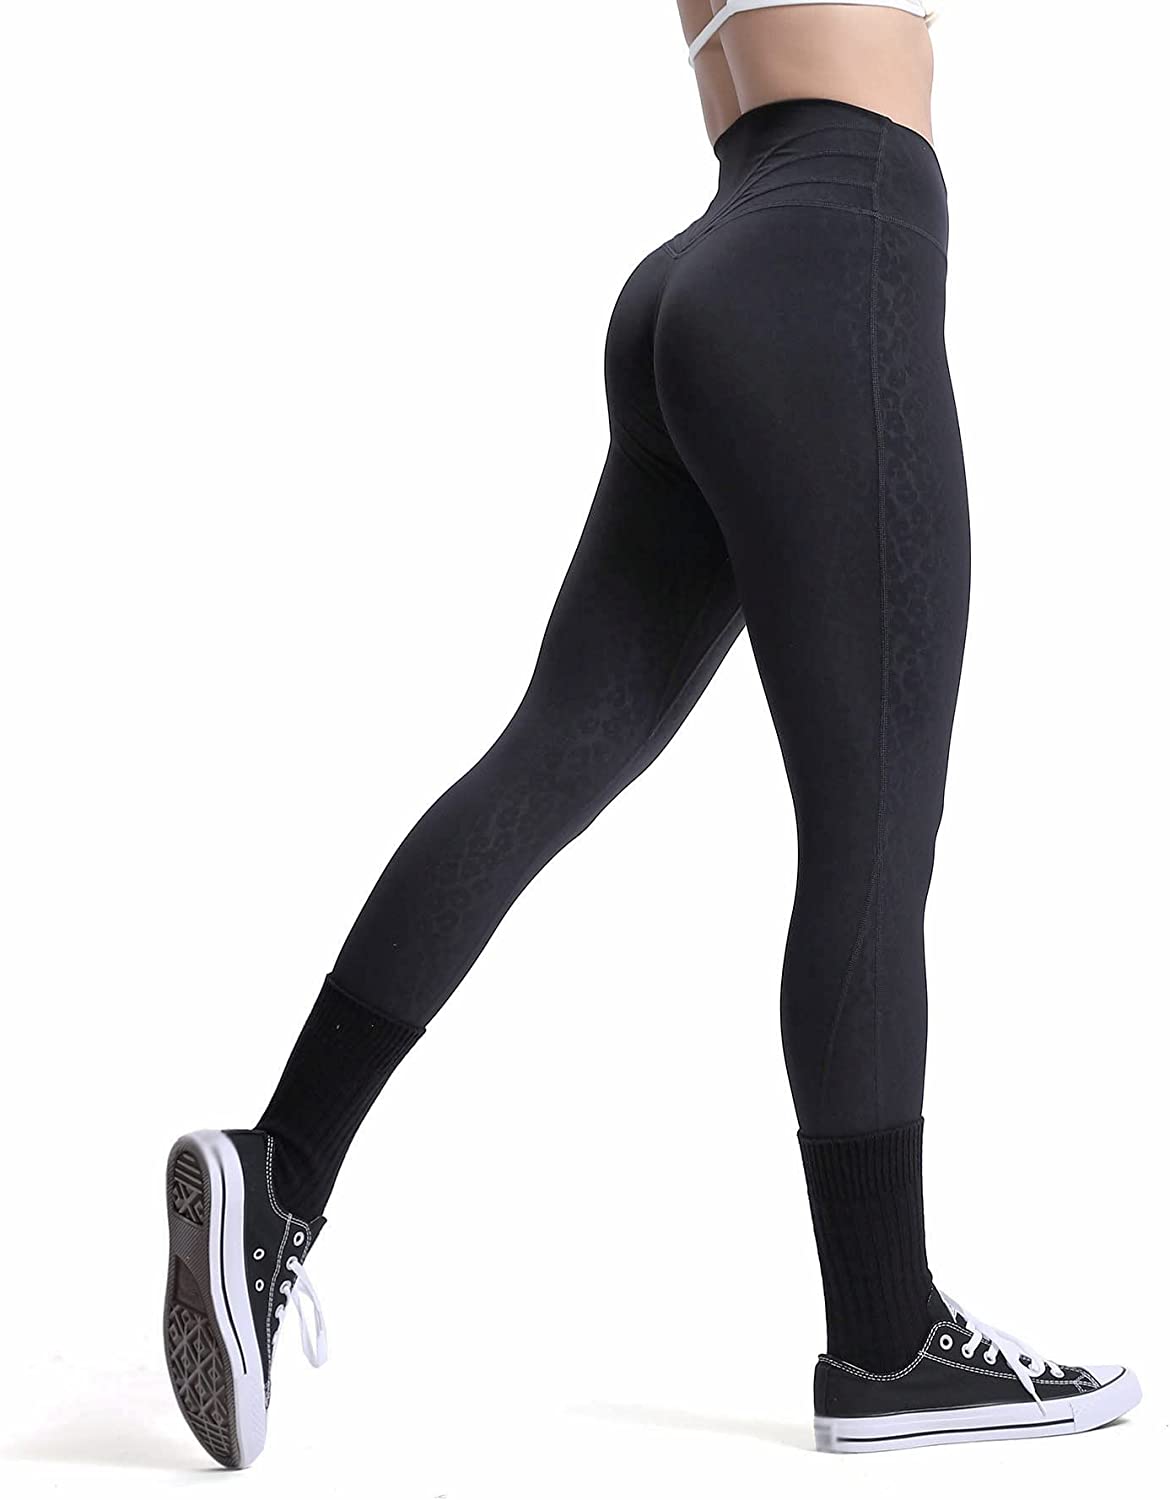 Aoxjox High Waisted Workout Leggings for Women Compression Tummy Control  Trinity Buttery Soft Yoga Pants 26